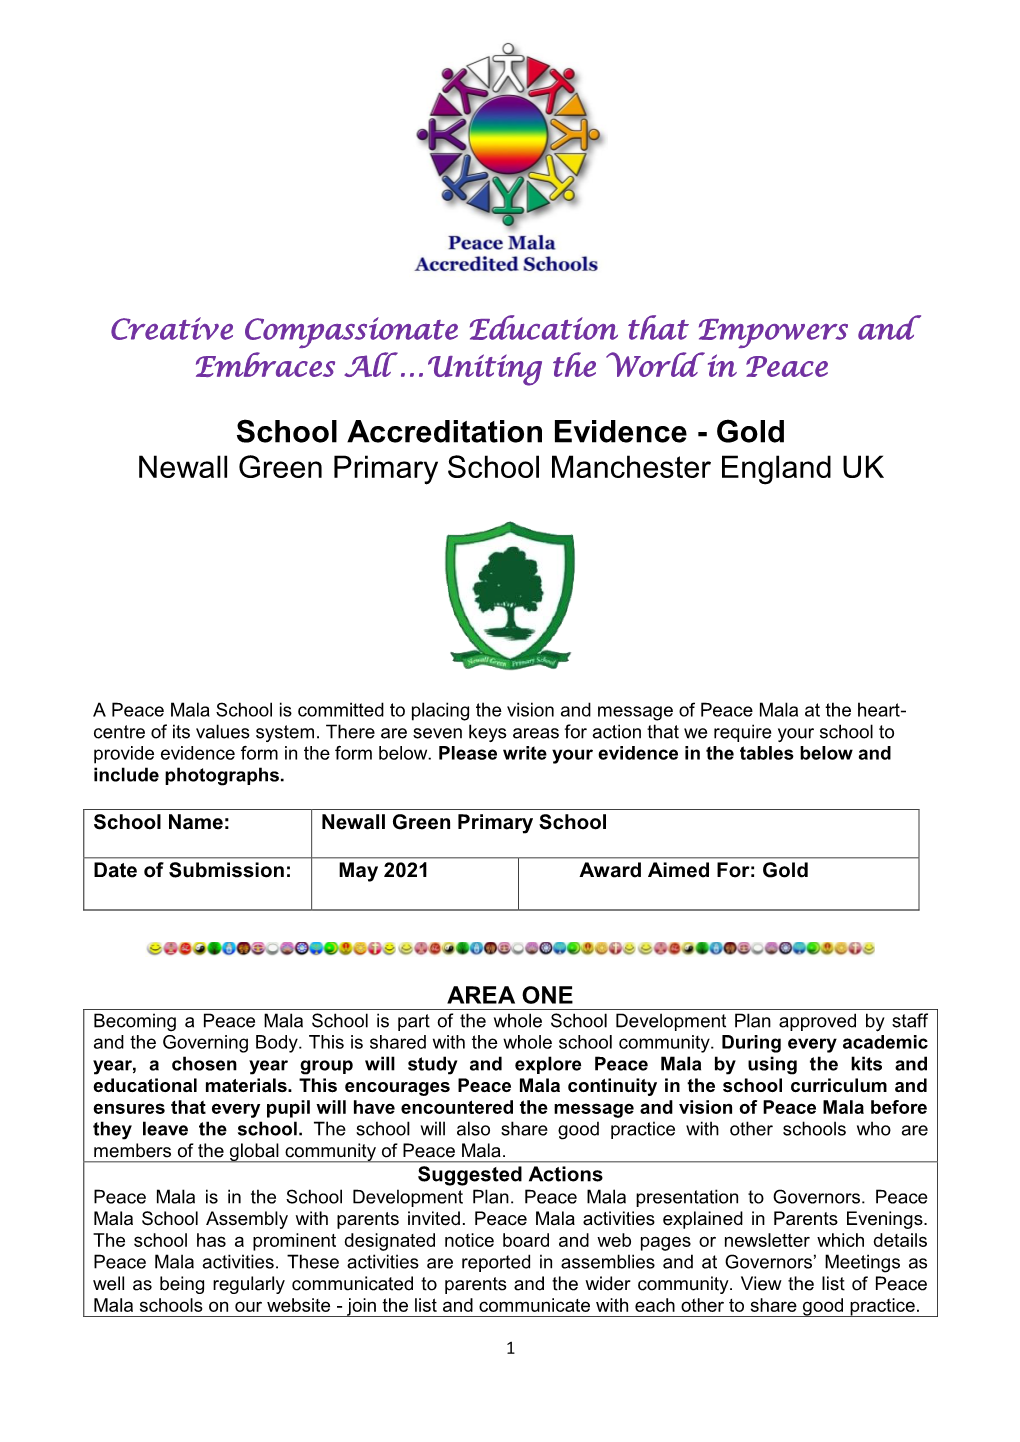 School Accreditation Evidence - Gold Newall Green Primary School Manchester England UK